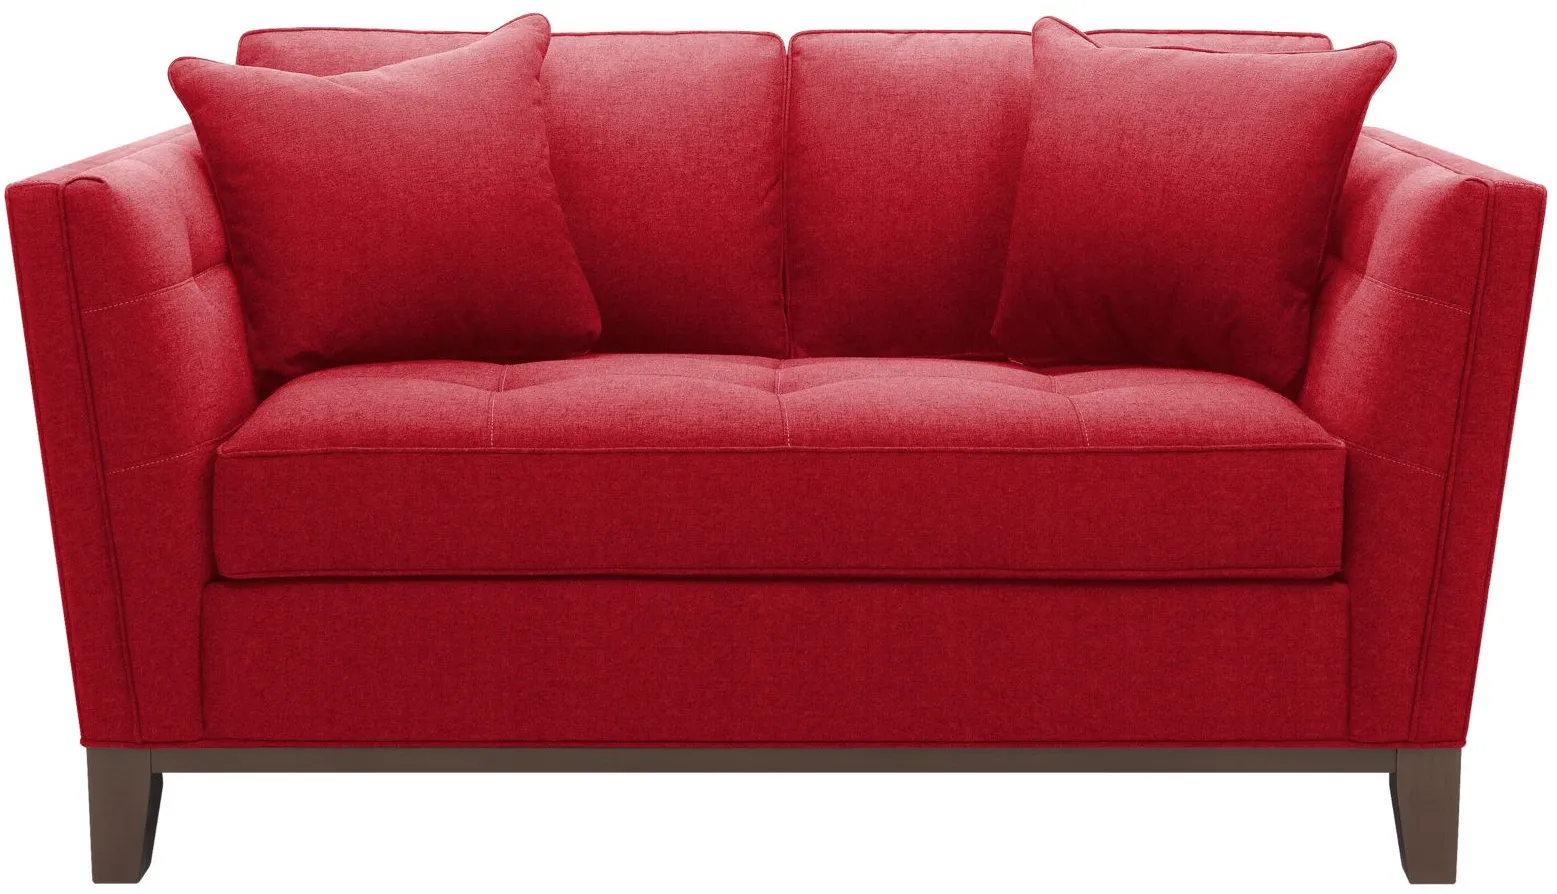 Macauley Loveseat in Suede So Soft Cardinal by H.M. Richards